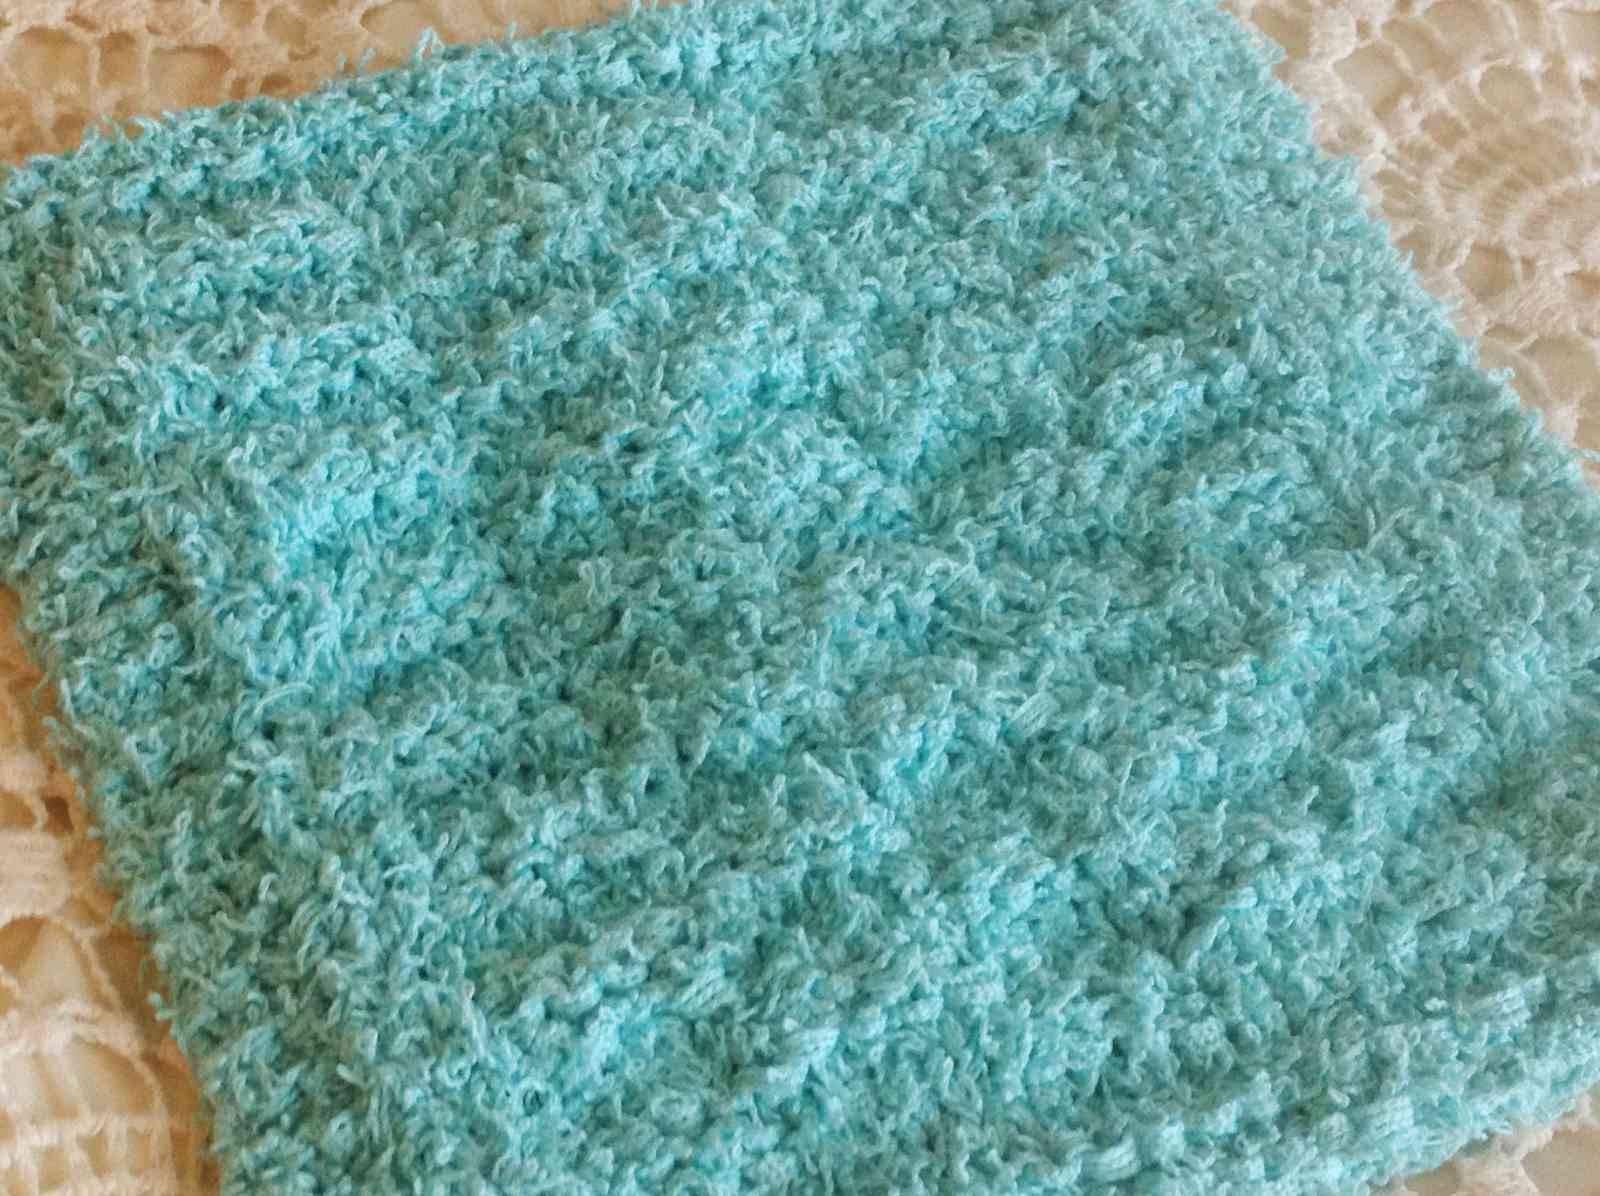 Knit Washcloth Patterns 10 Knit Dishcloth Patterns For Beginners